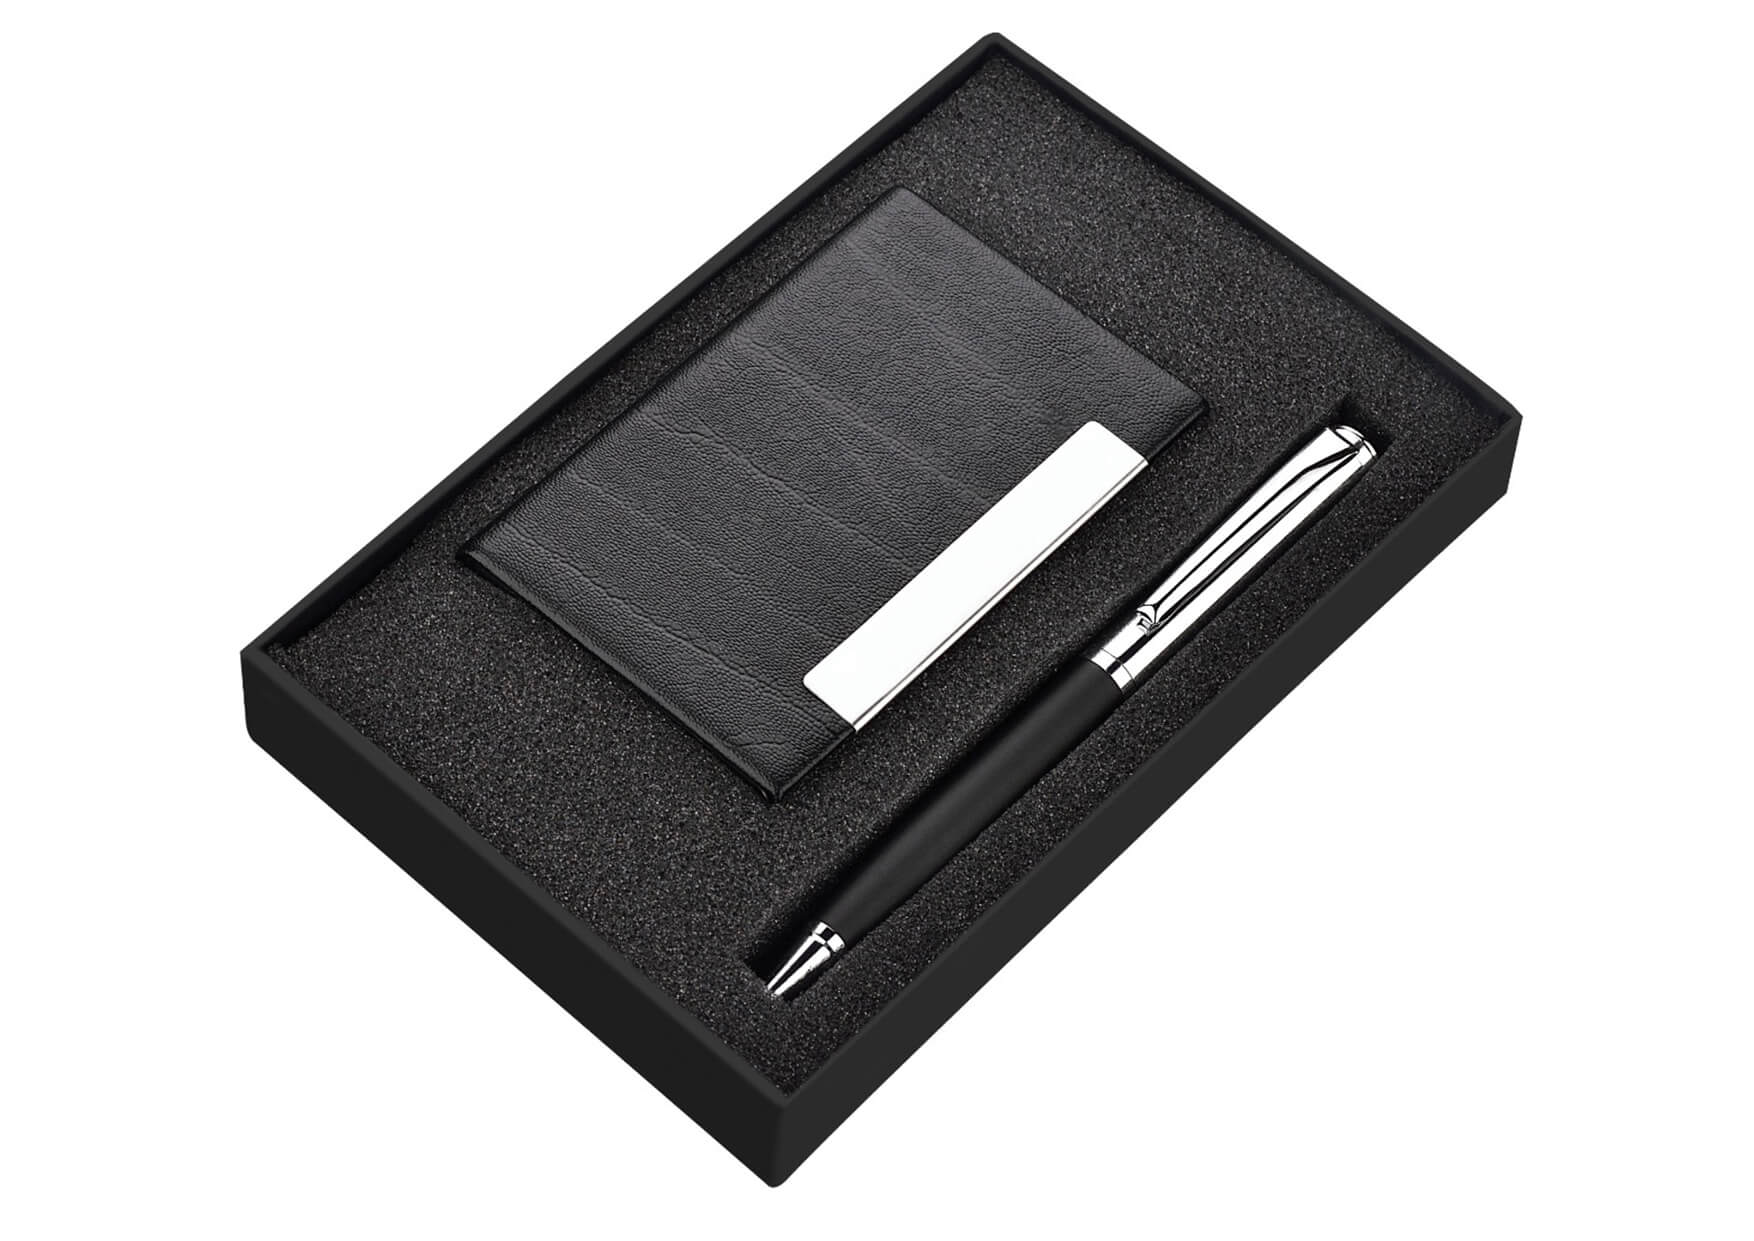 Card Holder and Pen Set 2 in 1 Plata